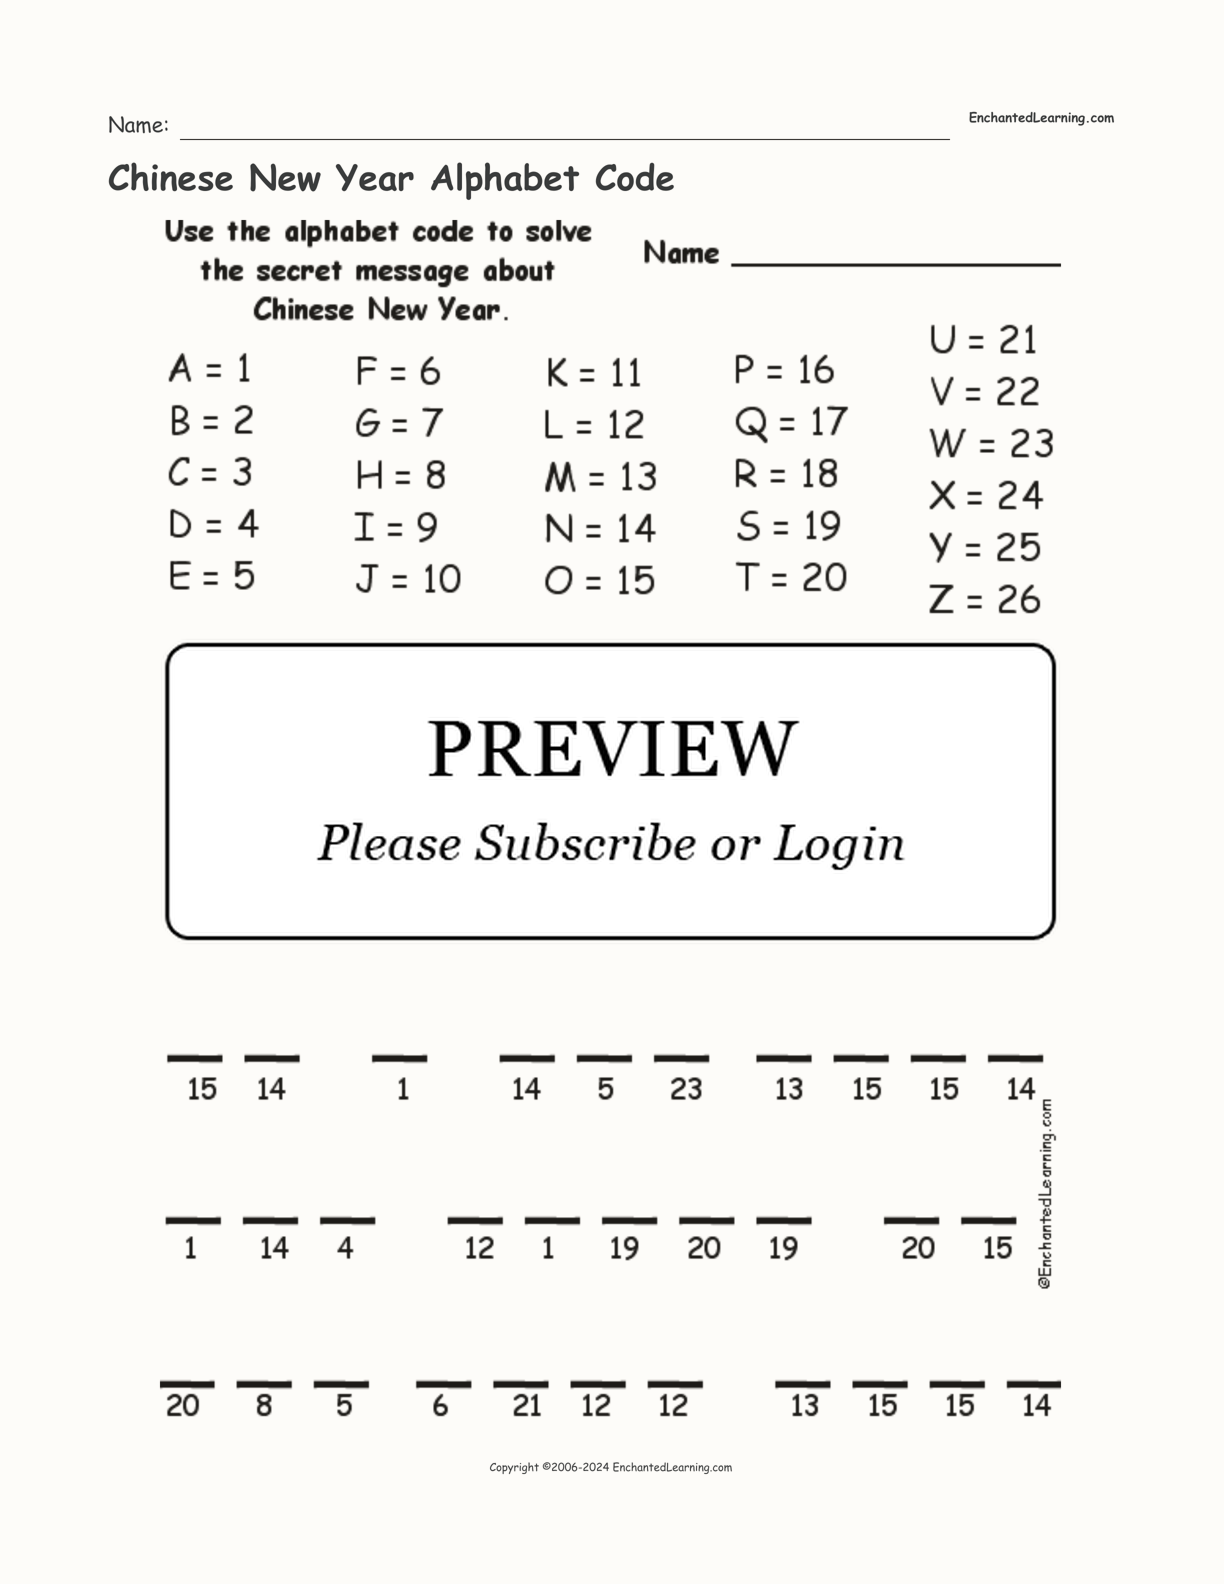 Chinese New Year Alphabet Code interactive worksheet page 1